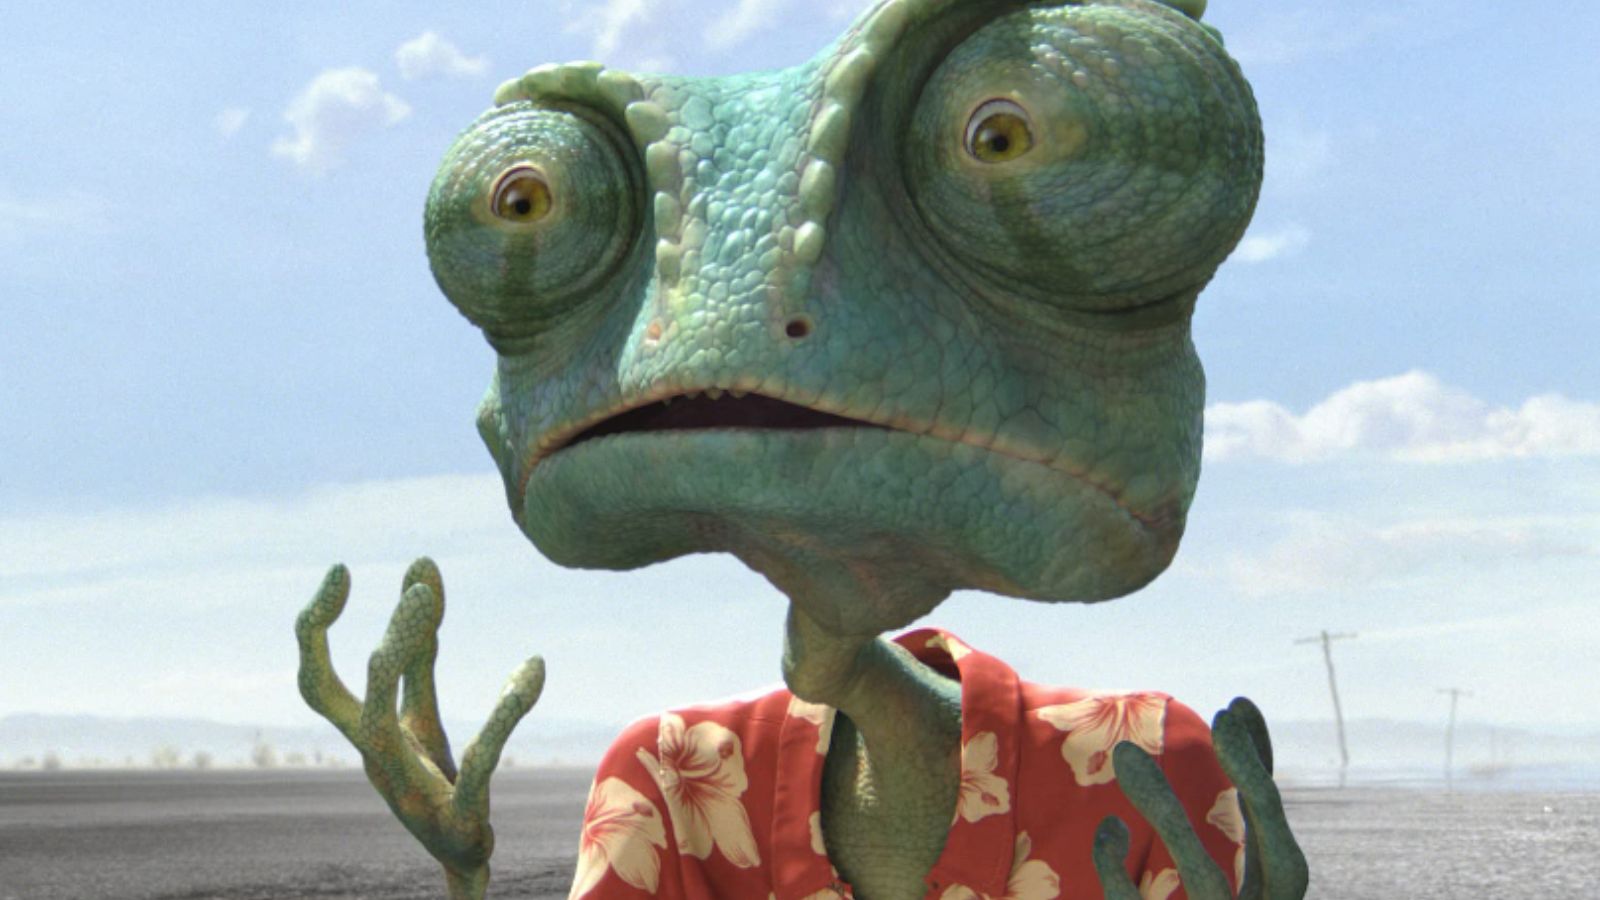 <p><em>Rango</em> is one movie with an excellent plot and stunning visuals. It is about the adventures of a chameleon, the sheriff of a wild town. The film contains clever references and witty dialogue, and the animation is top-notch.</p>